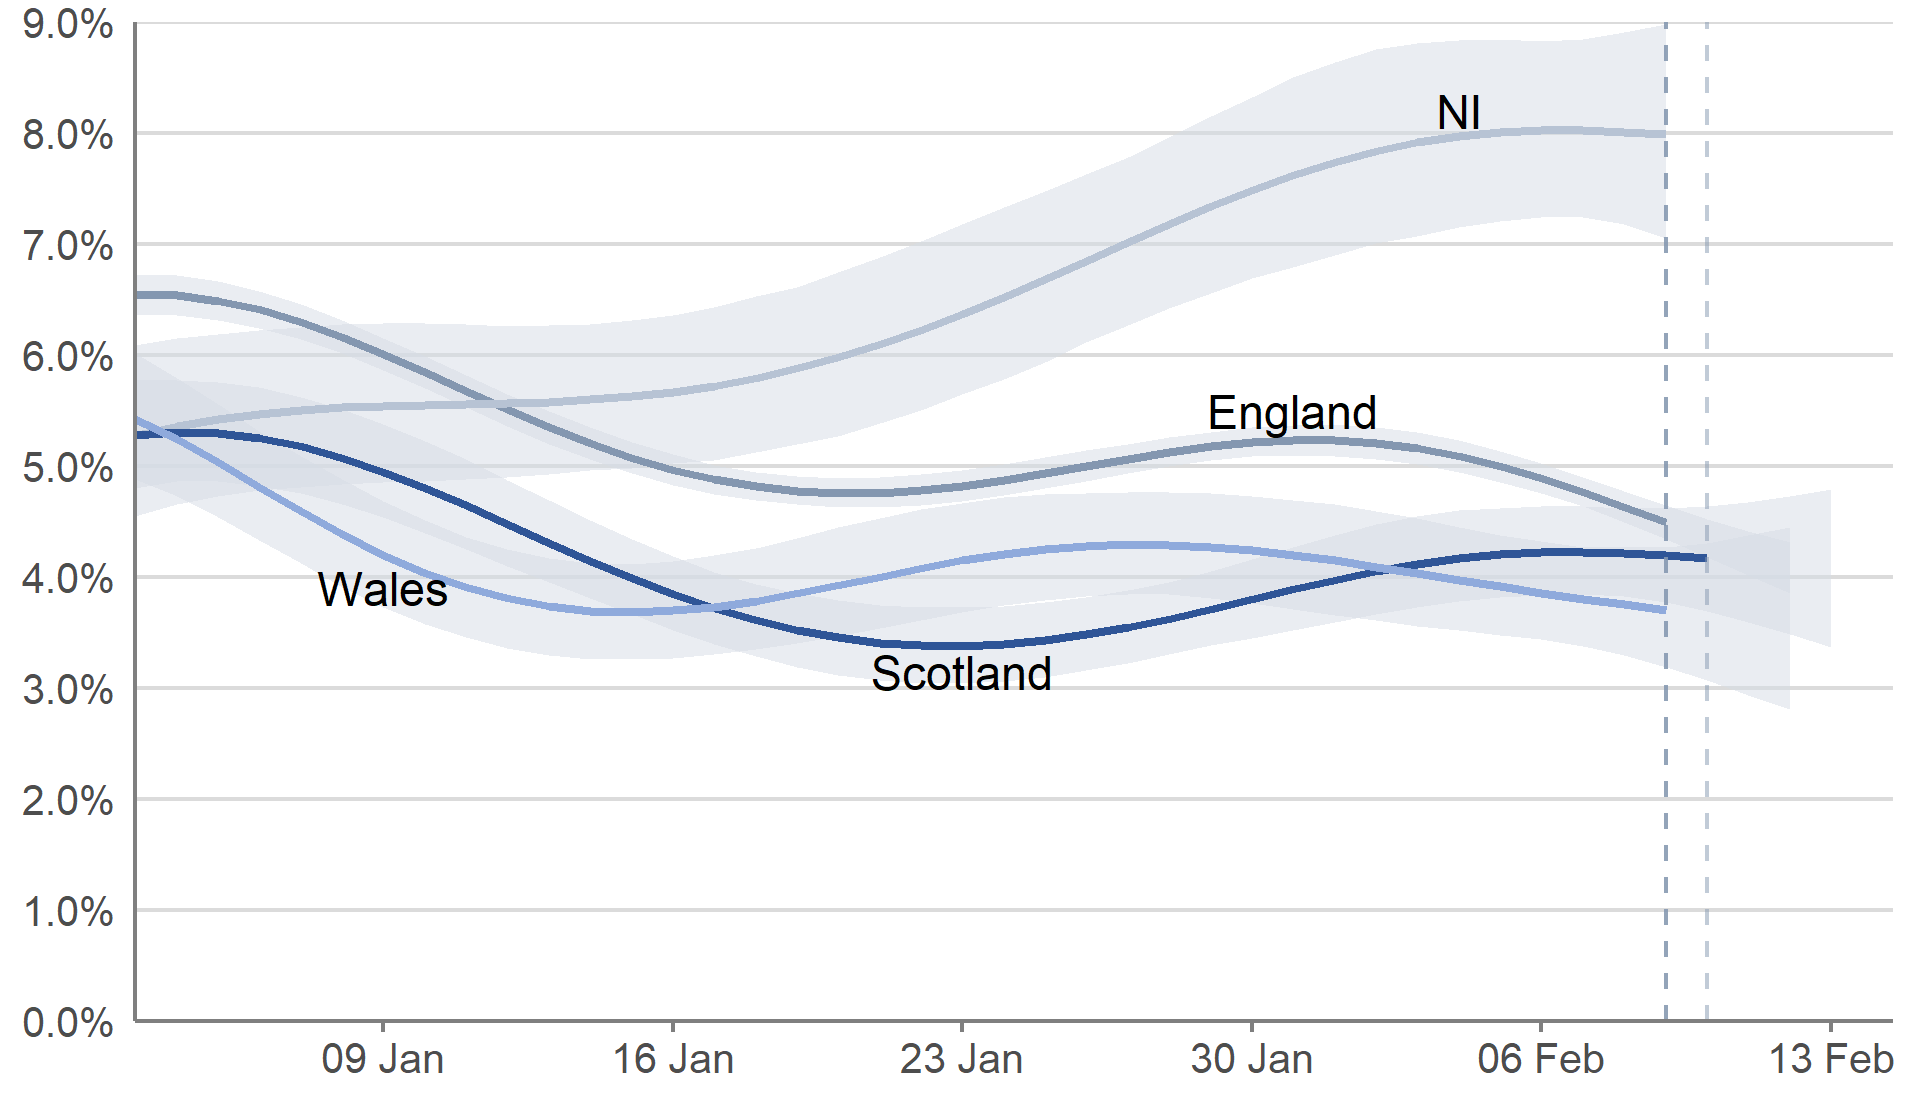 In England, the estimated percentage of people testing positive decreased in the week up to 12 February 2022. The estimated percentage of people testing positive has continued to decrease in Wales. In Scotland and Northern Ireland, the estimate increased in the two most recent weeks, but the trend was uncertain in the most recent week.